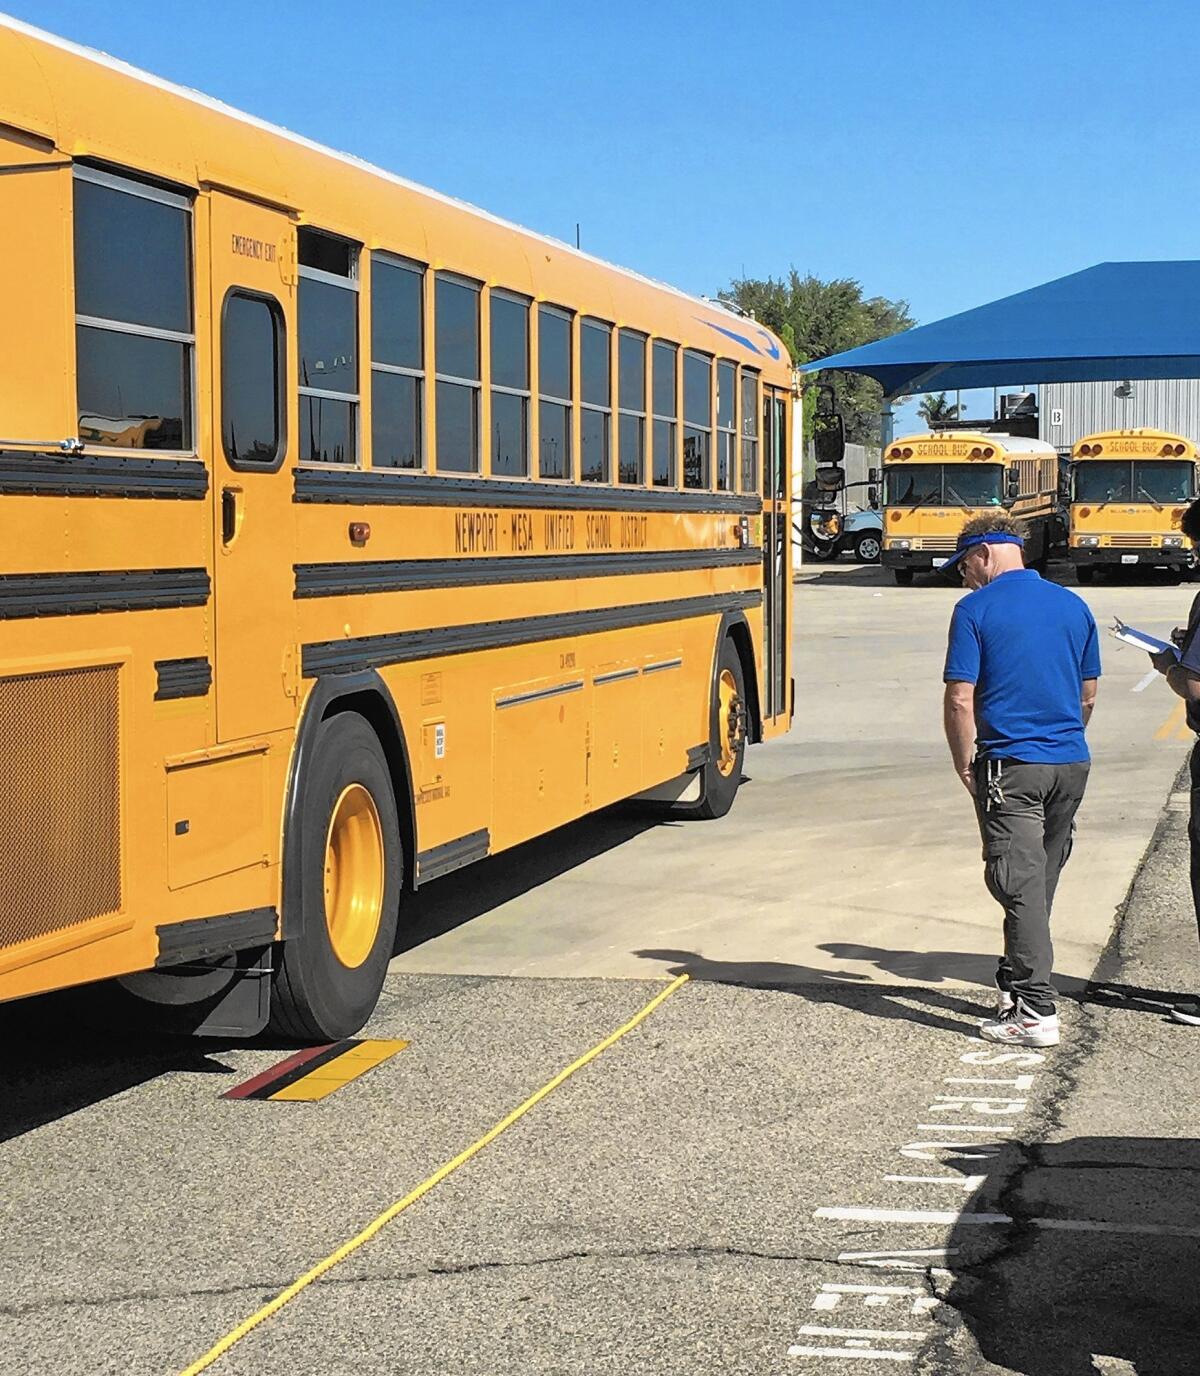 Employees of Newport-Mesa Unified School District's Transportation Department competed in the Orange County School Bus Roadeo in Garden Grove Saturday. Events in the tournament included taking a school bus through different courses and parallel parking.